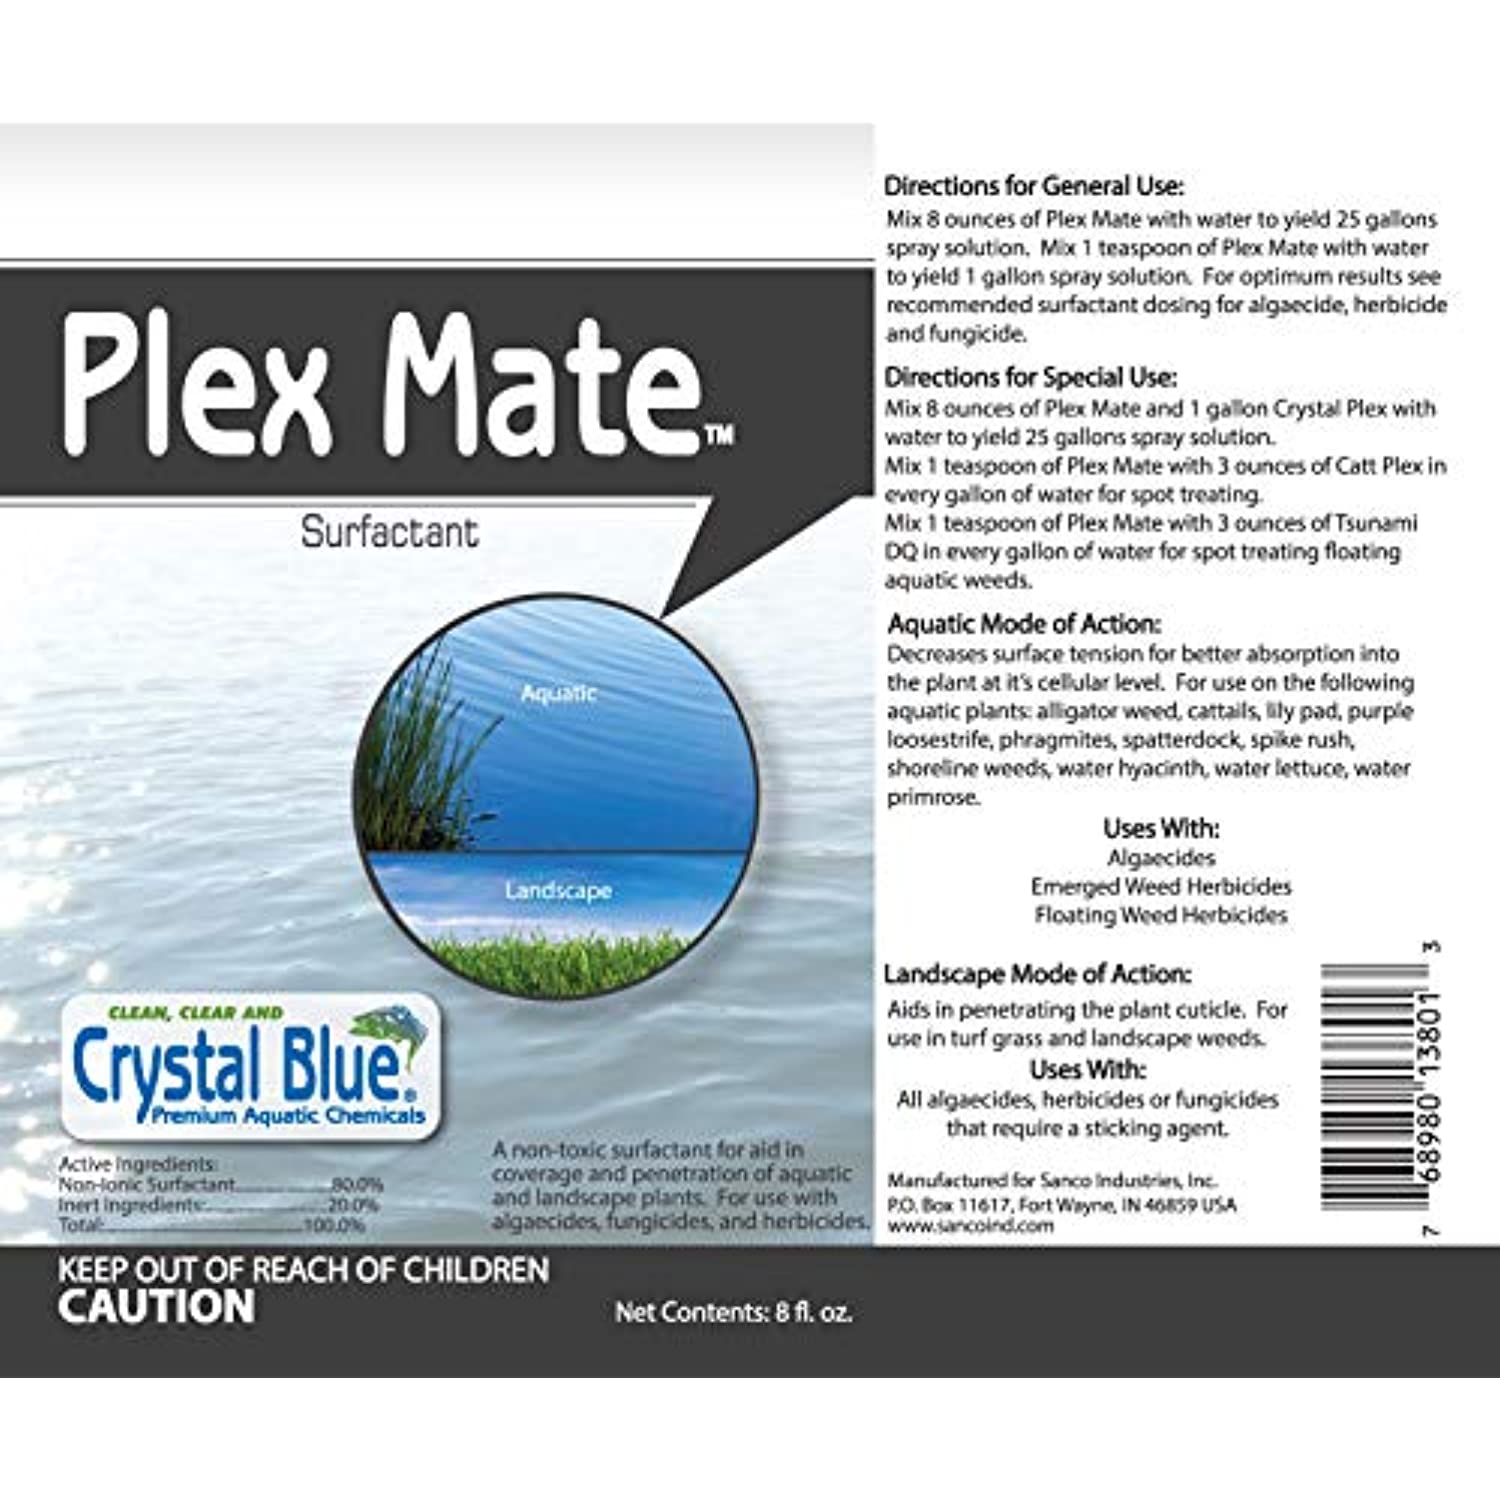 Crystal Blue Plex Mate Aquatic Surfactant for Herbicides - 8 Ounces - Non-Ionic, Increase Product Coverage, Increase Product Penetration, Increase Product Effectiveness